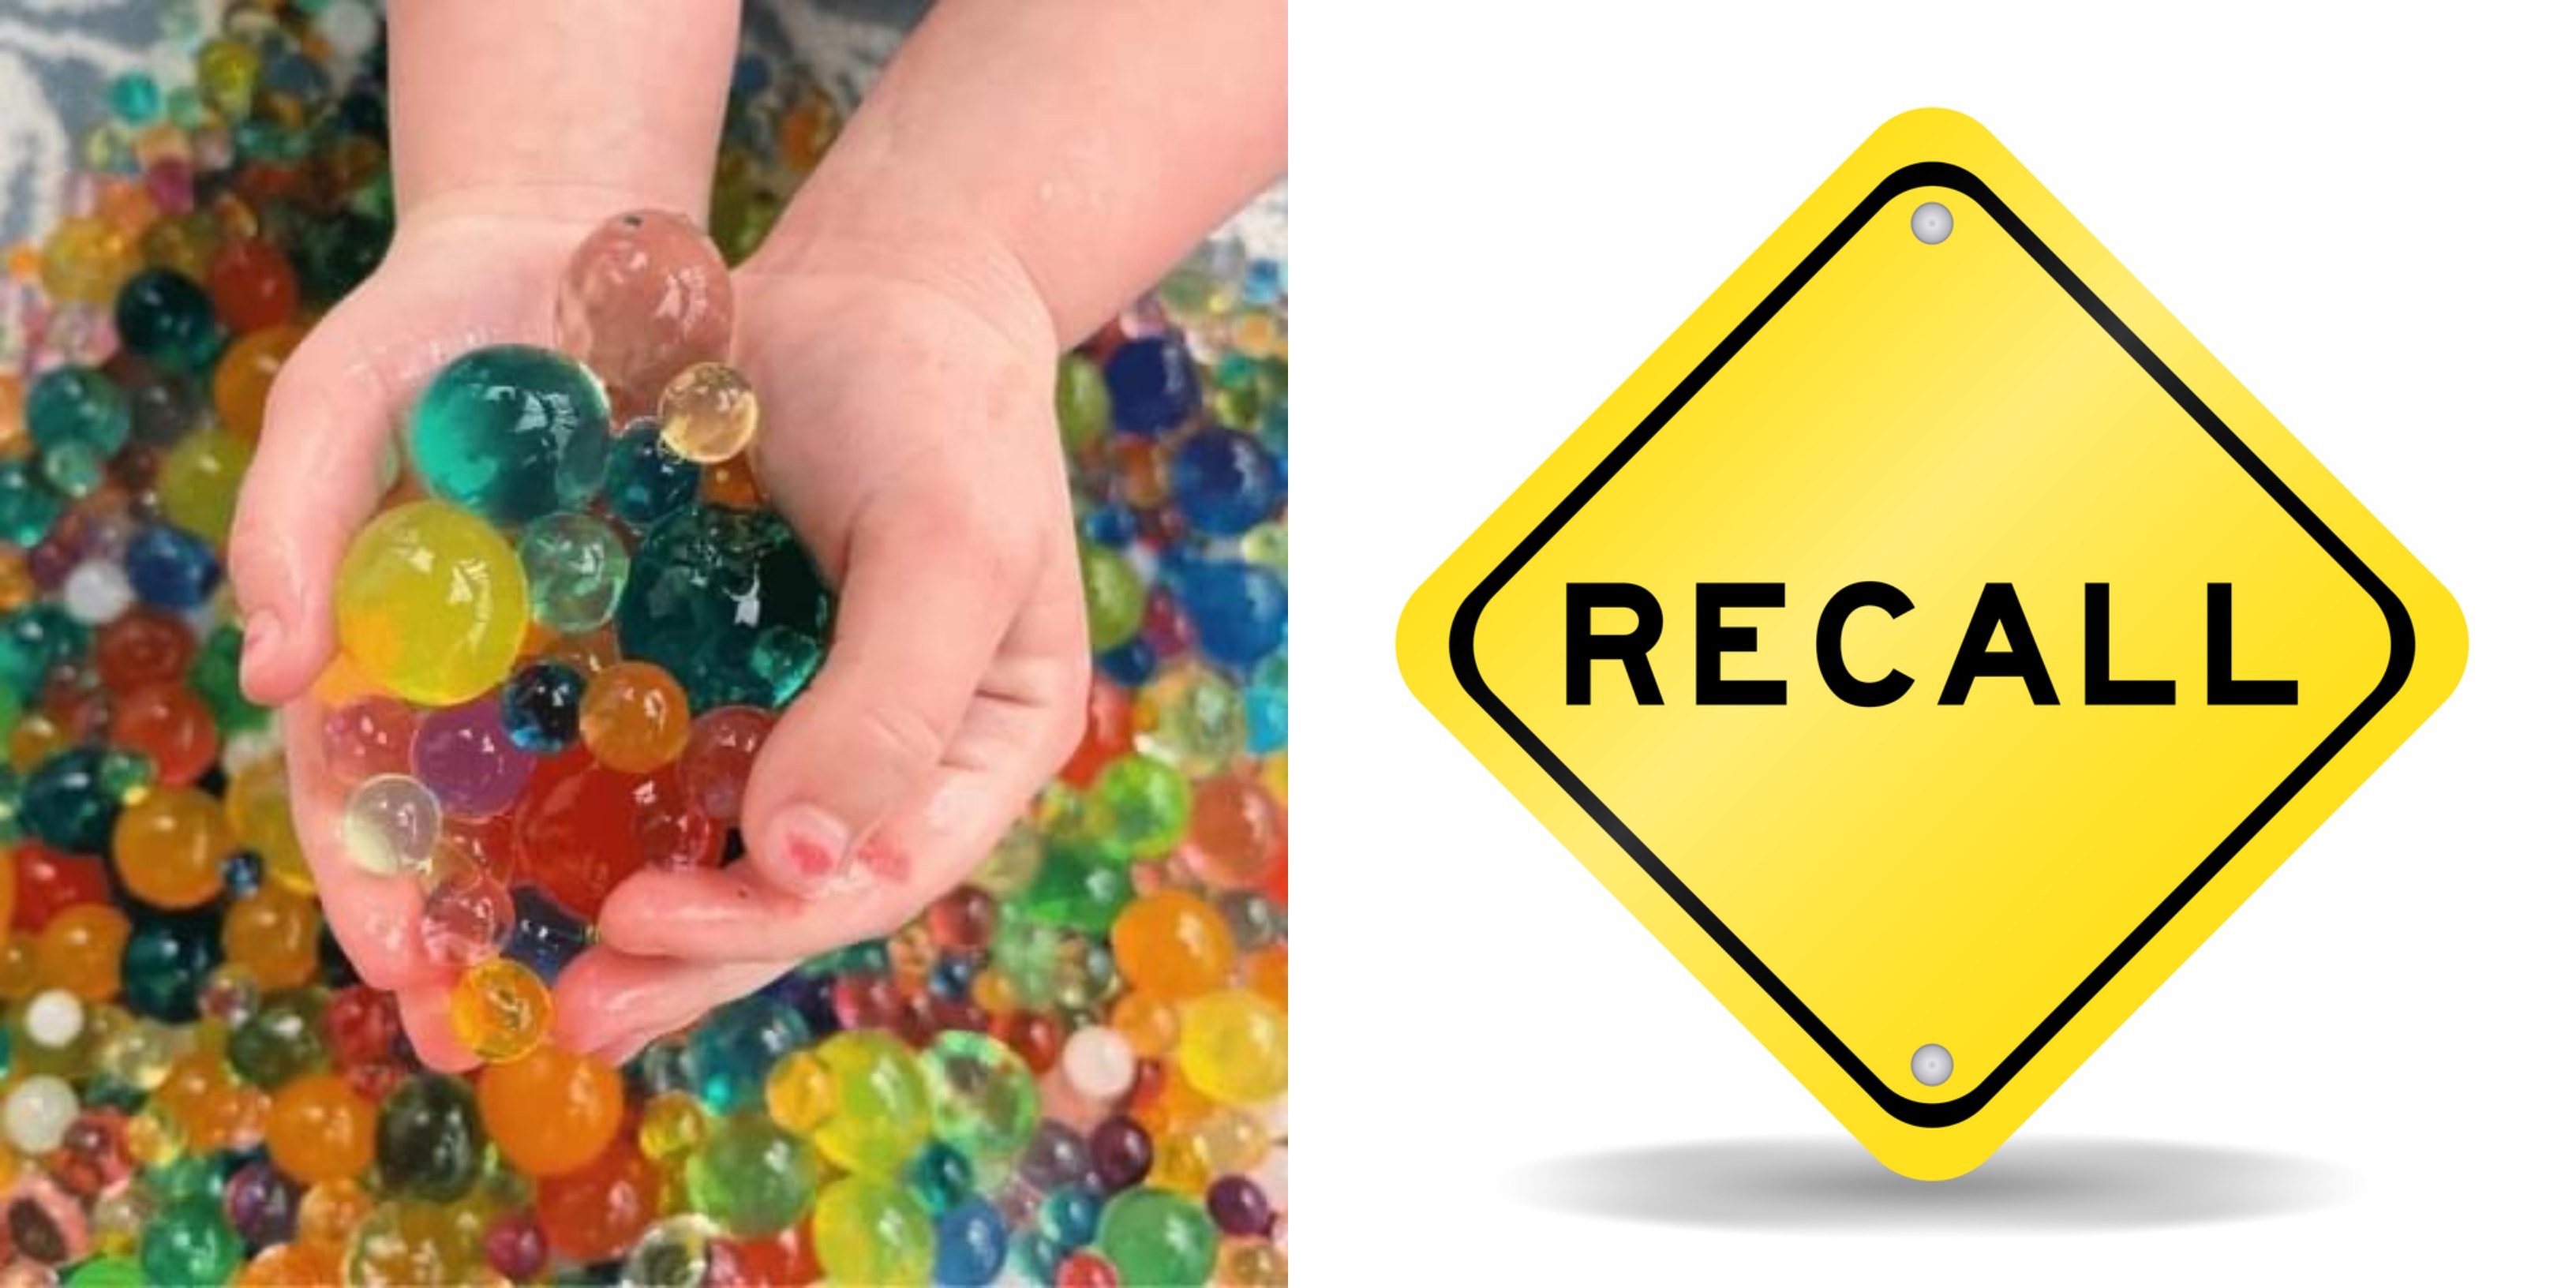 Lawsuit targets 'Orbeez' water bead toy over safety and potential health  risks for kids